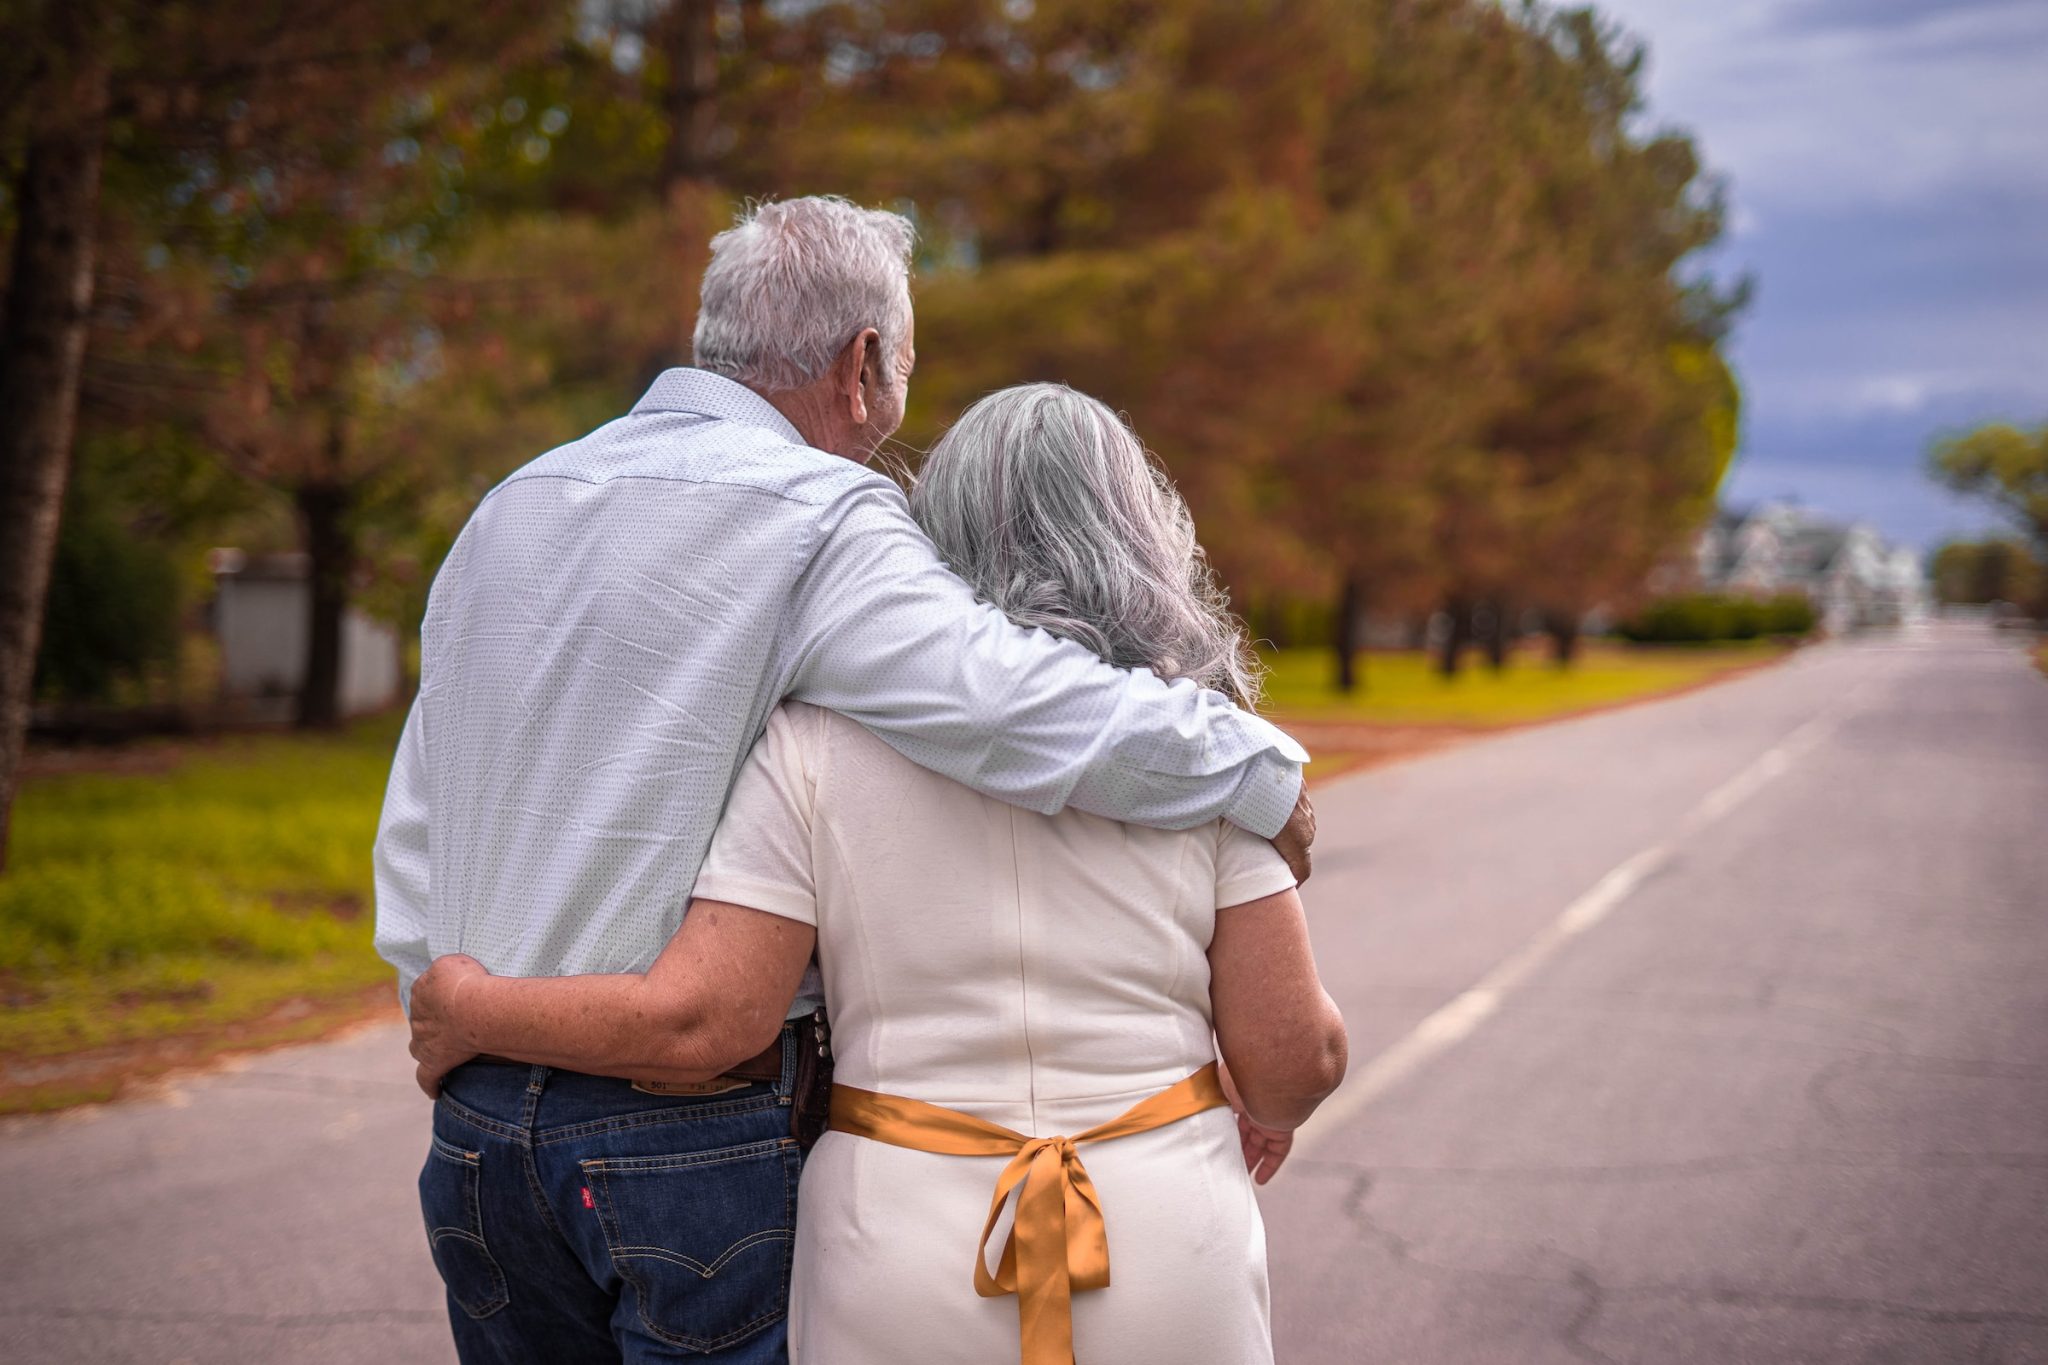 4 ways a memory care facility can transform your parent’s life for the better